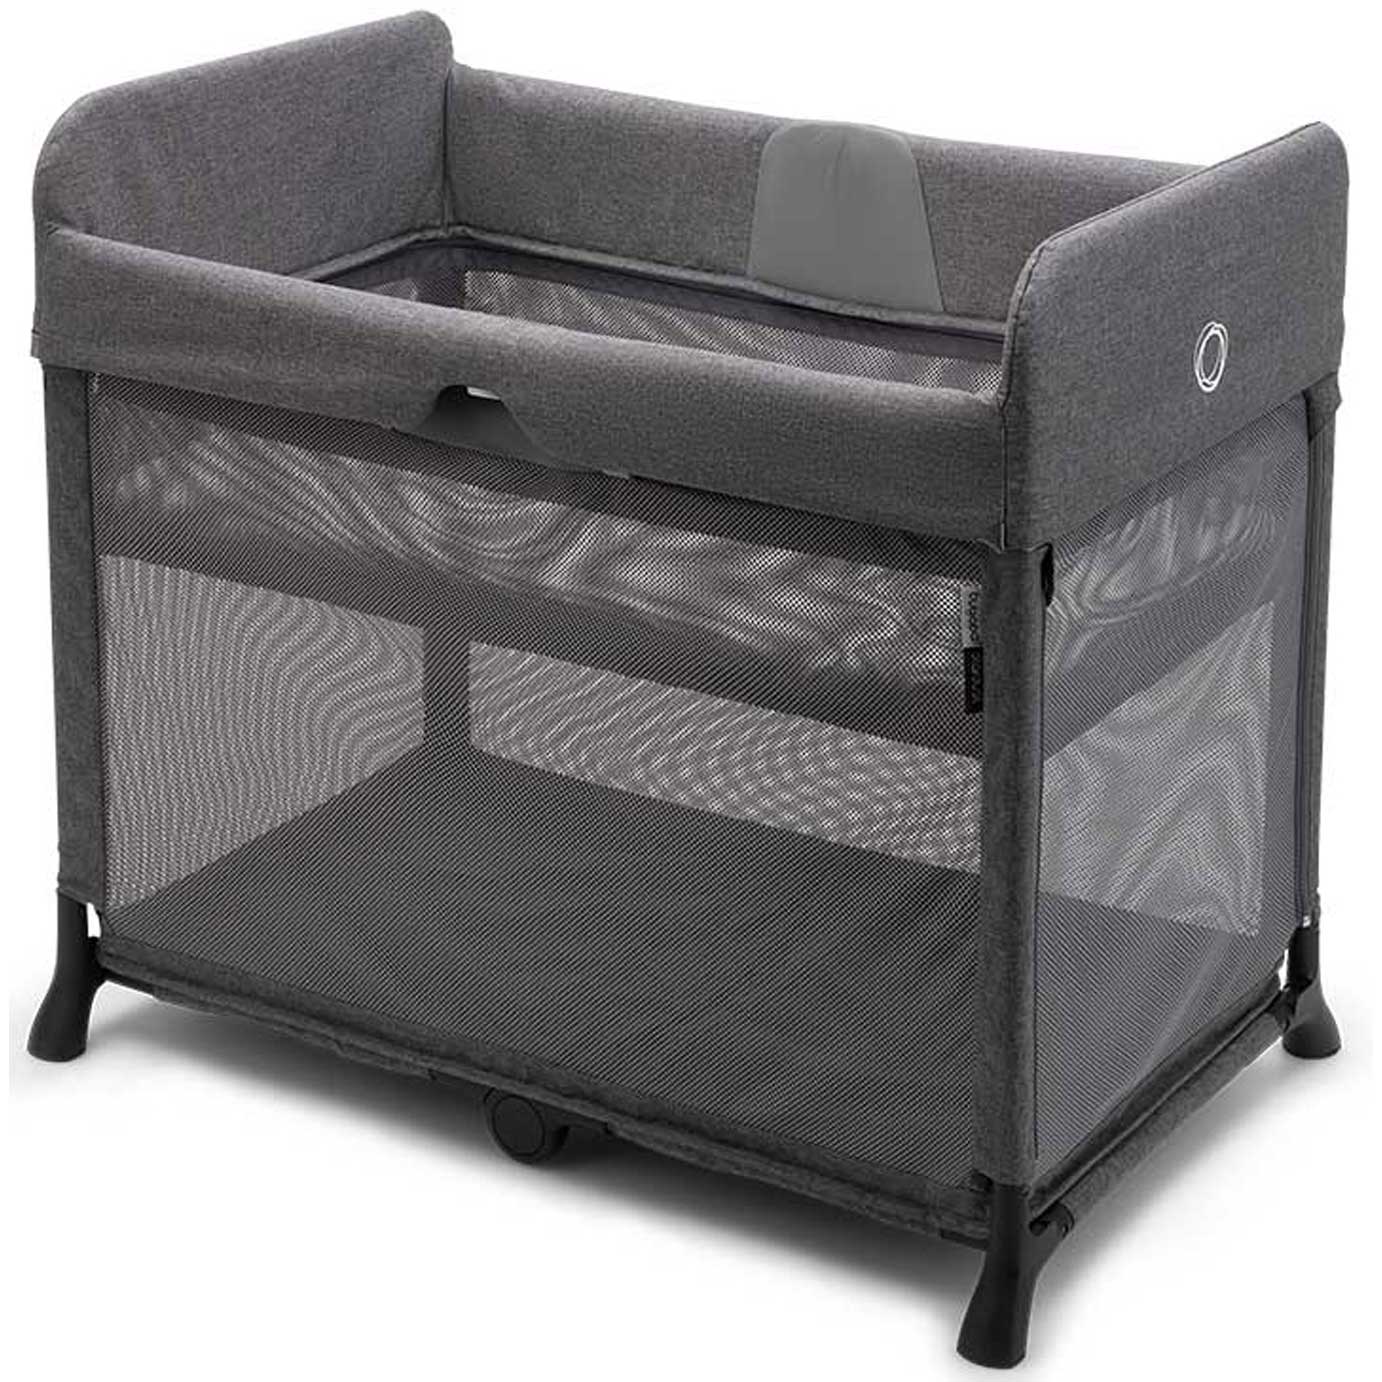 Bugaboo travel cots Bugaboo Stardust Travel Cot in Grey Melange 952000GM01